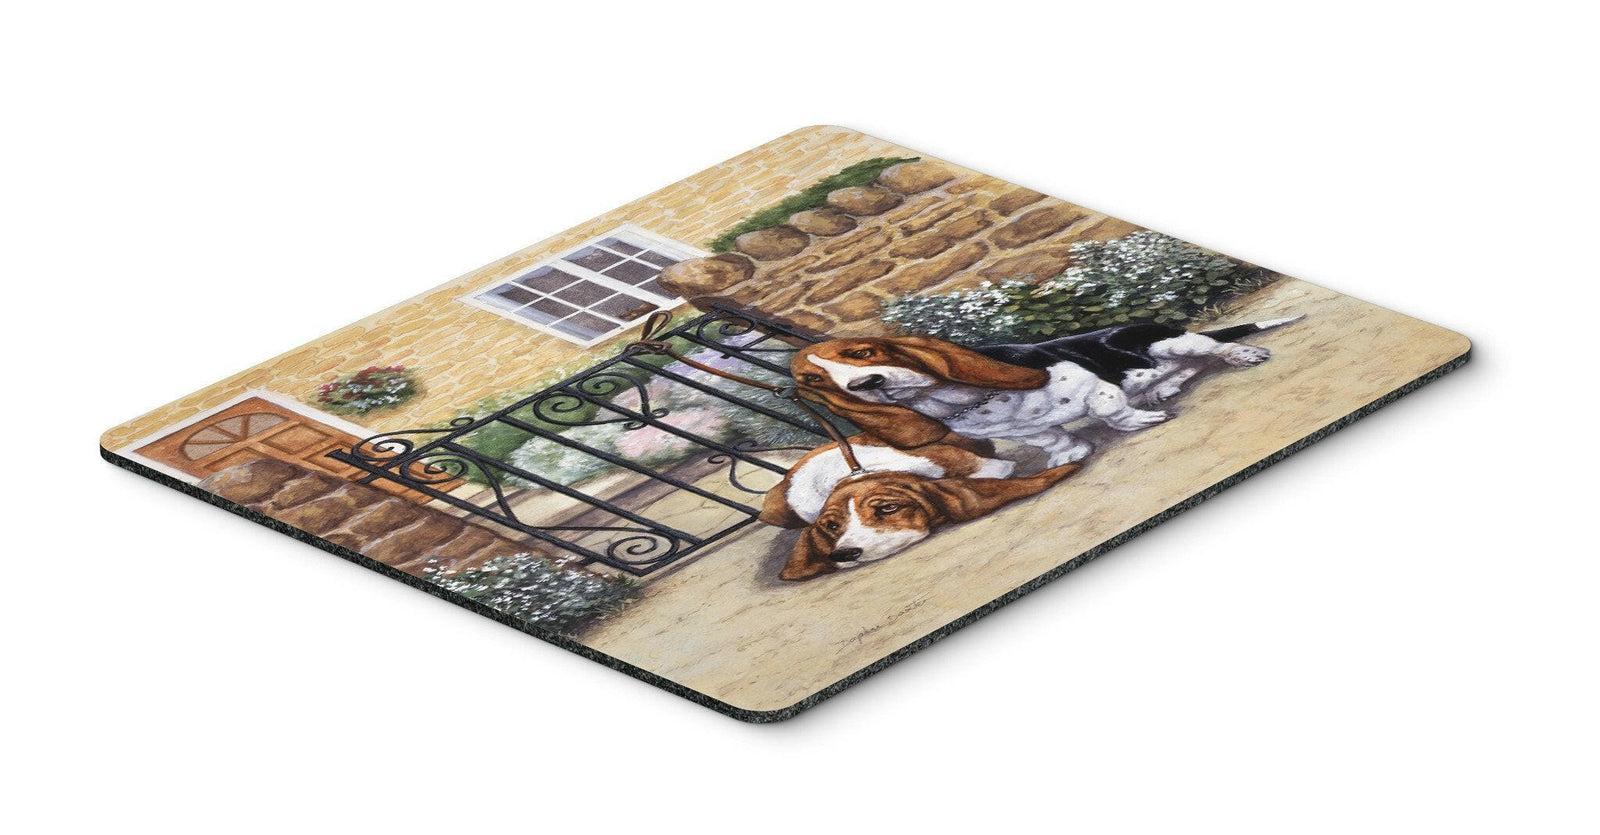 Basset Hound at the gate Mouse Pad, Hot Pad or Trivet BDBA0312MP by Caroline's Treasures